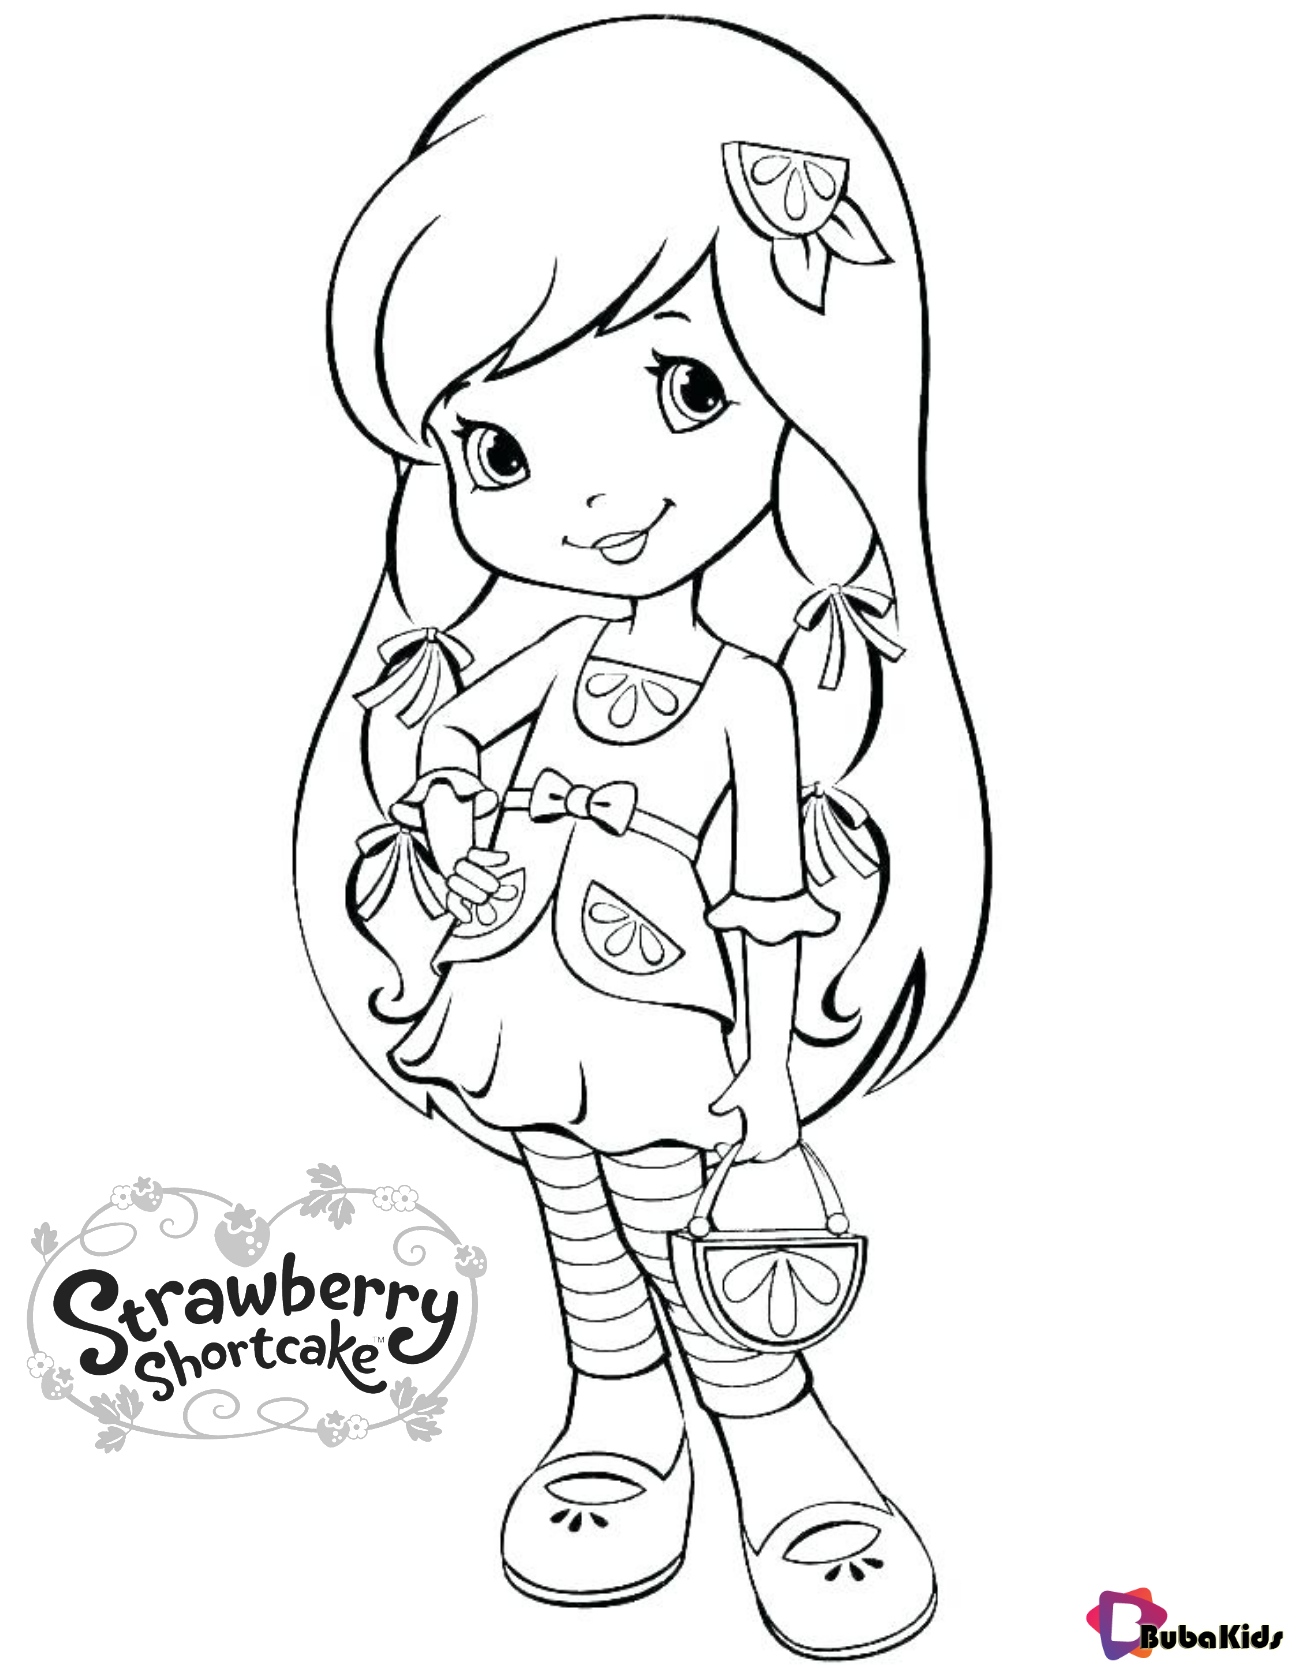 Strawberry Shortcake Coloring Pages For Kids